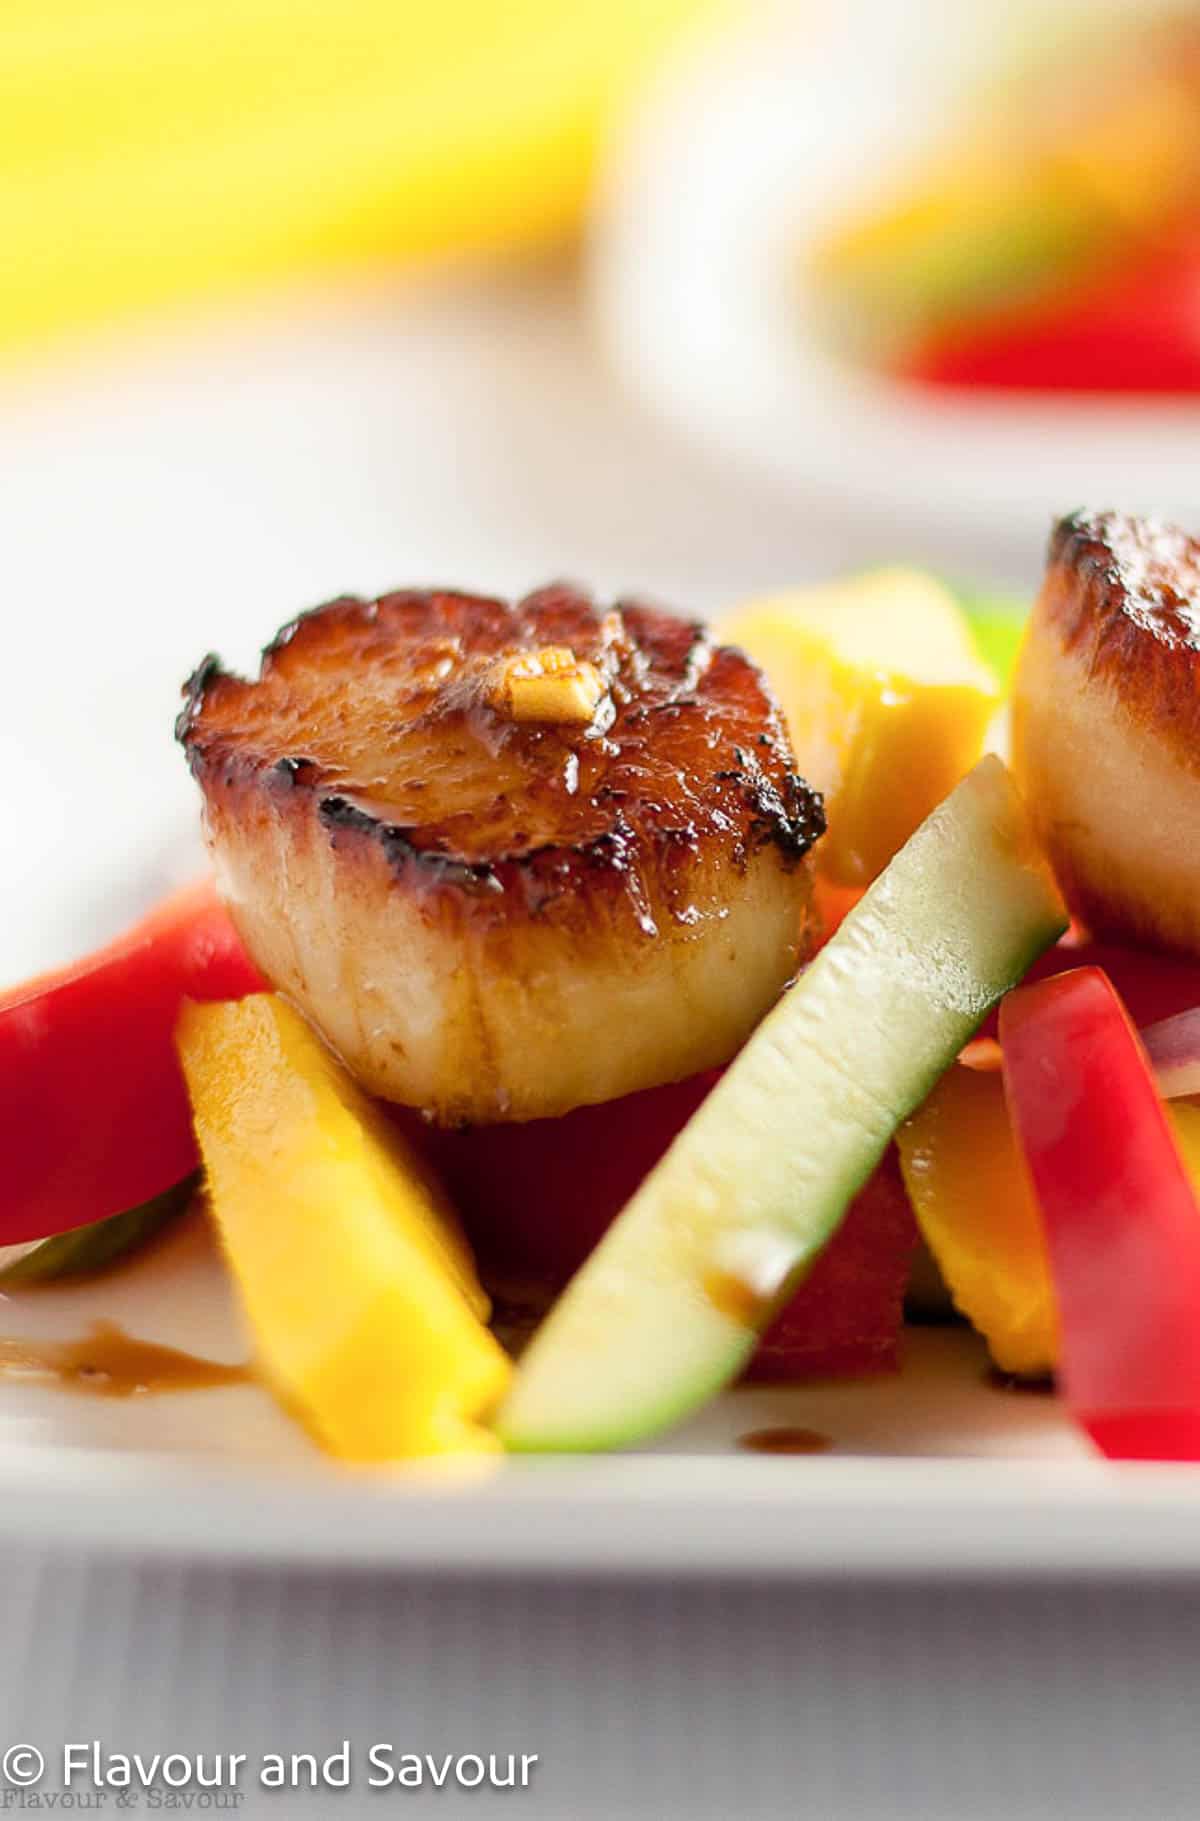 A single seared scallop on top of sliced mango, cucumber and red pepper.